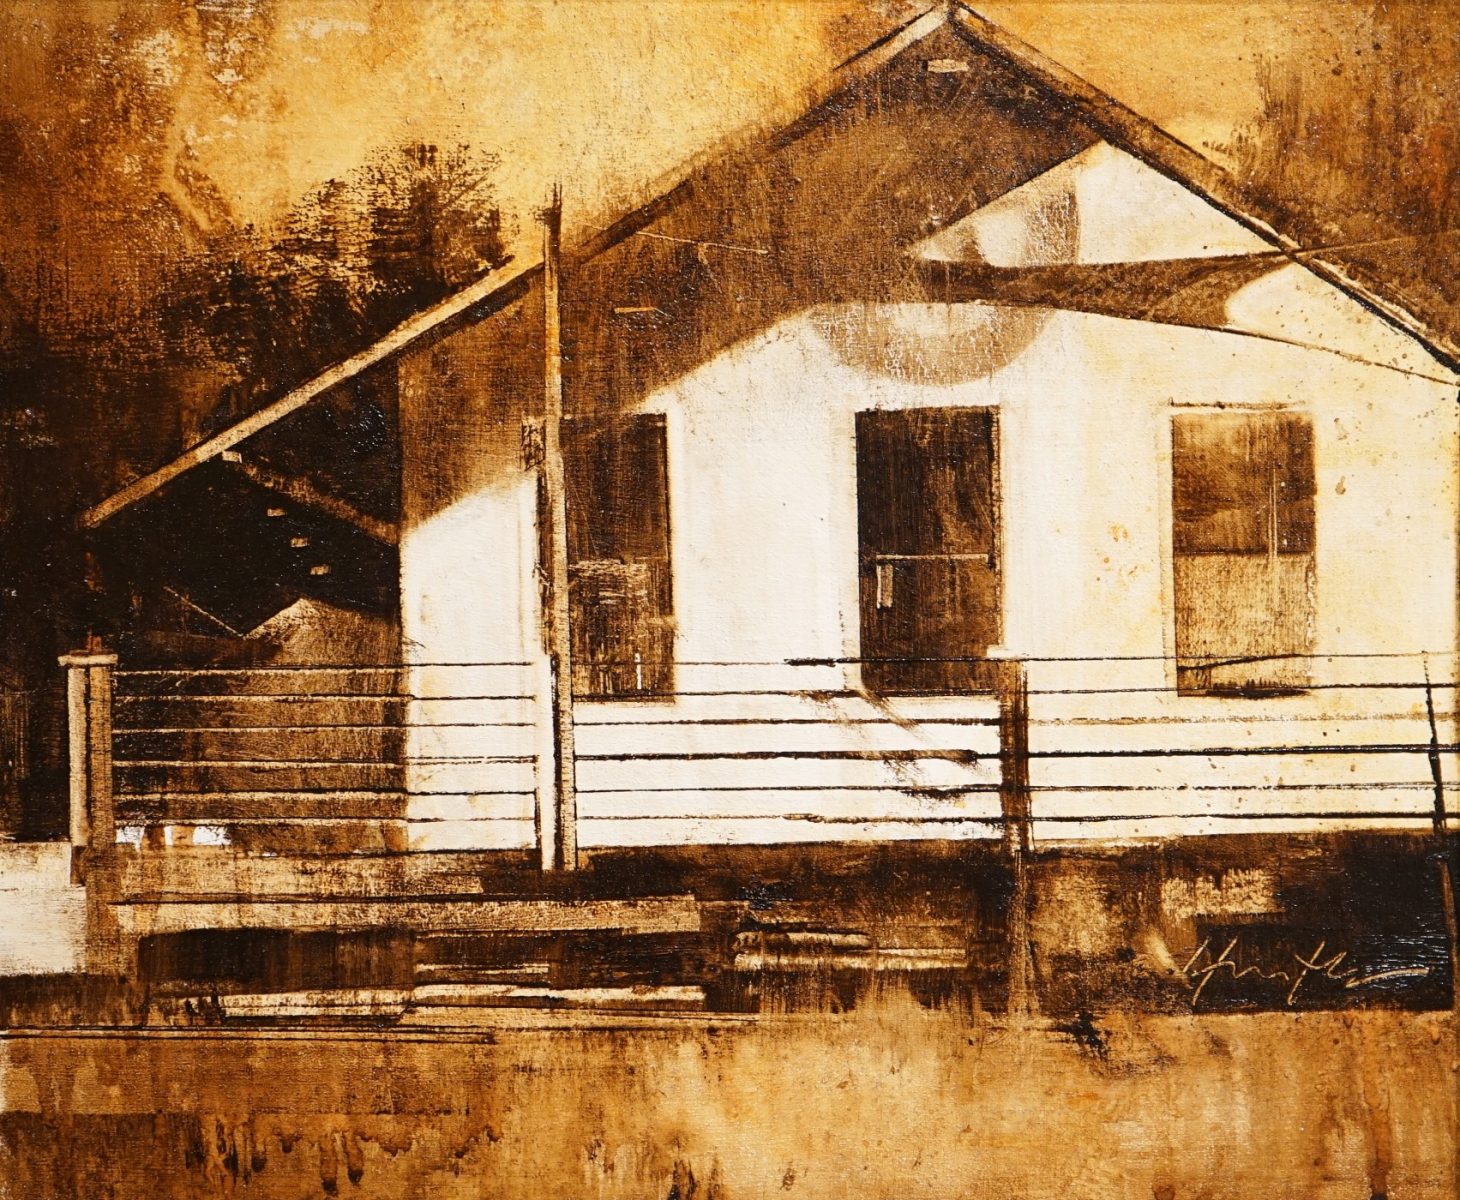 Oil painting of old structure by Charlie Hunter